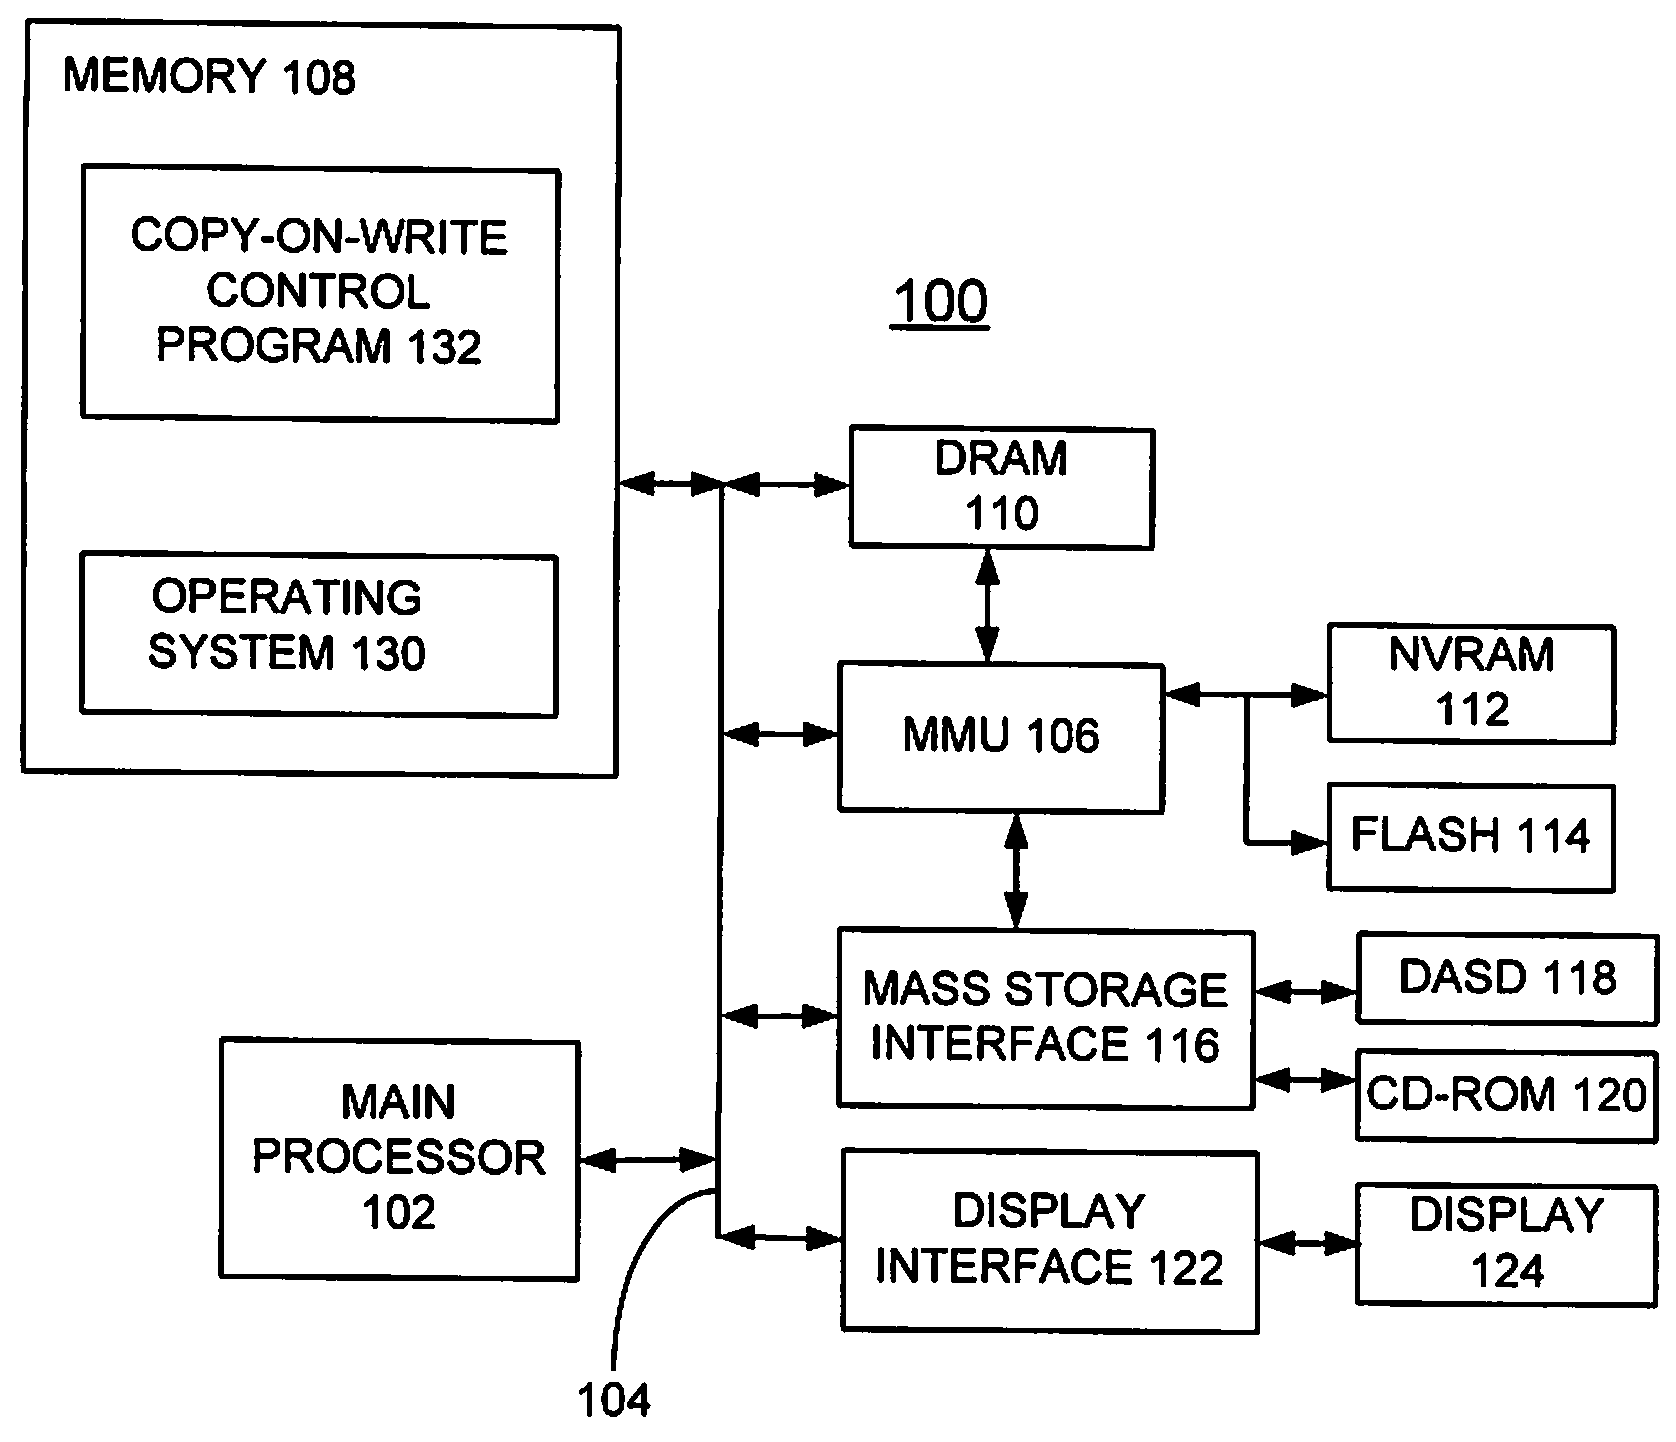 Method and apparatus for implementing dynamic copy-on-write (COW) storage compression through purge function